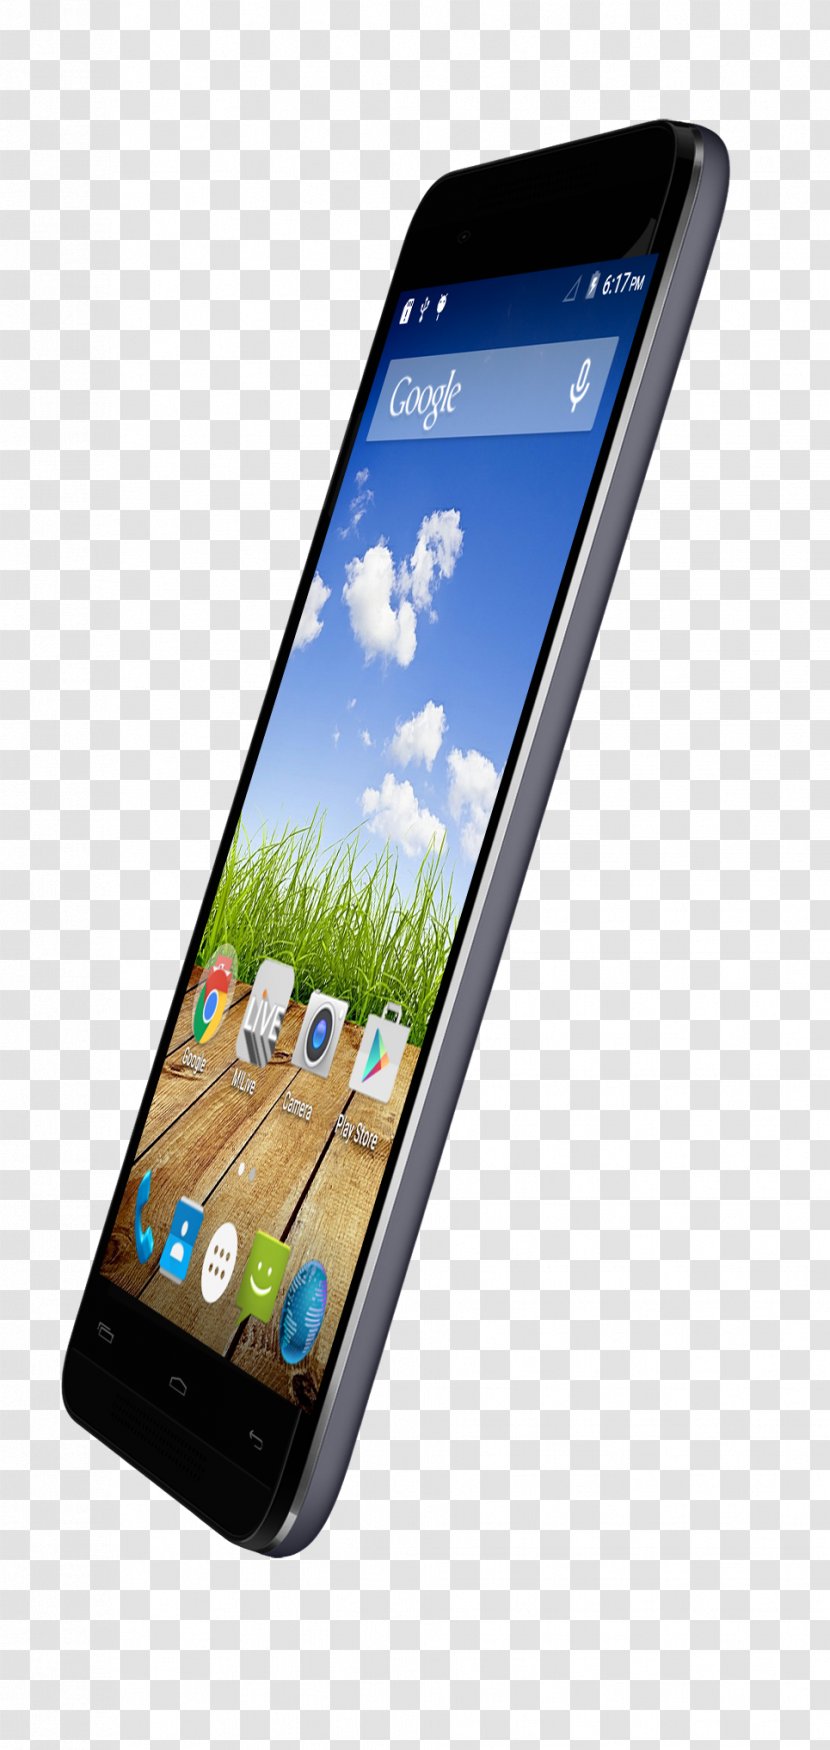 Micromax Informatics Telephone Canvas Infinity Smartphone Samsung A107 - Technology Transparent PNG